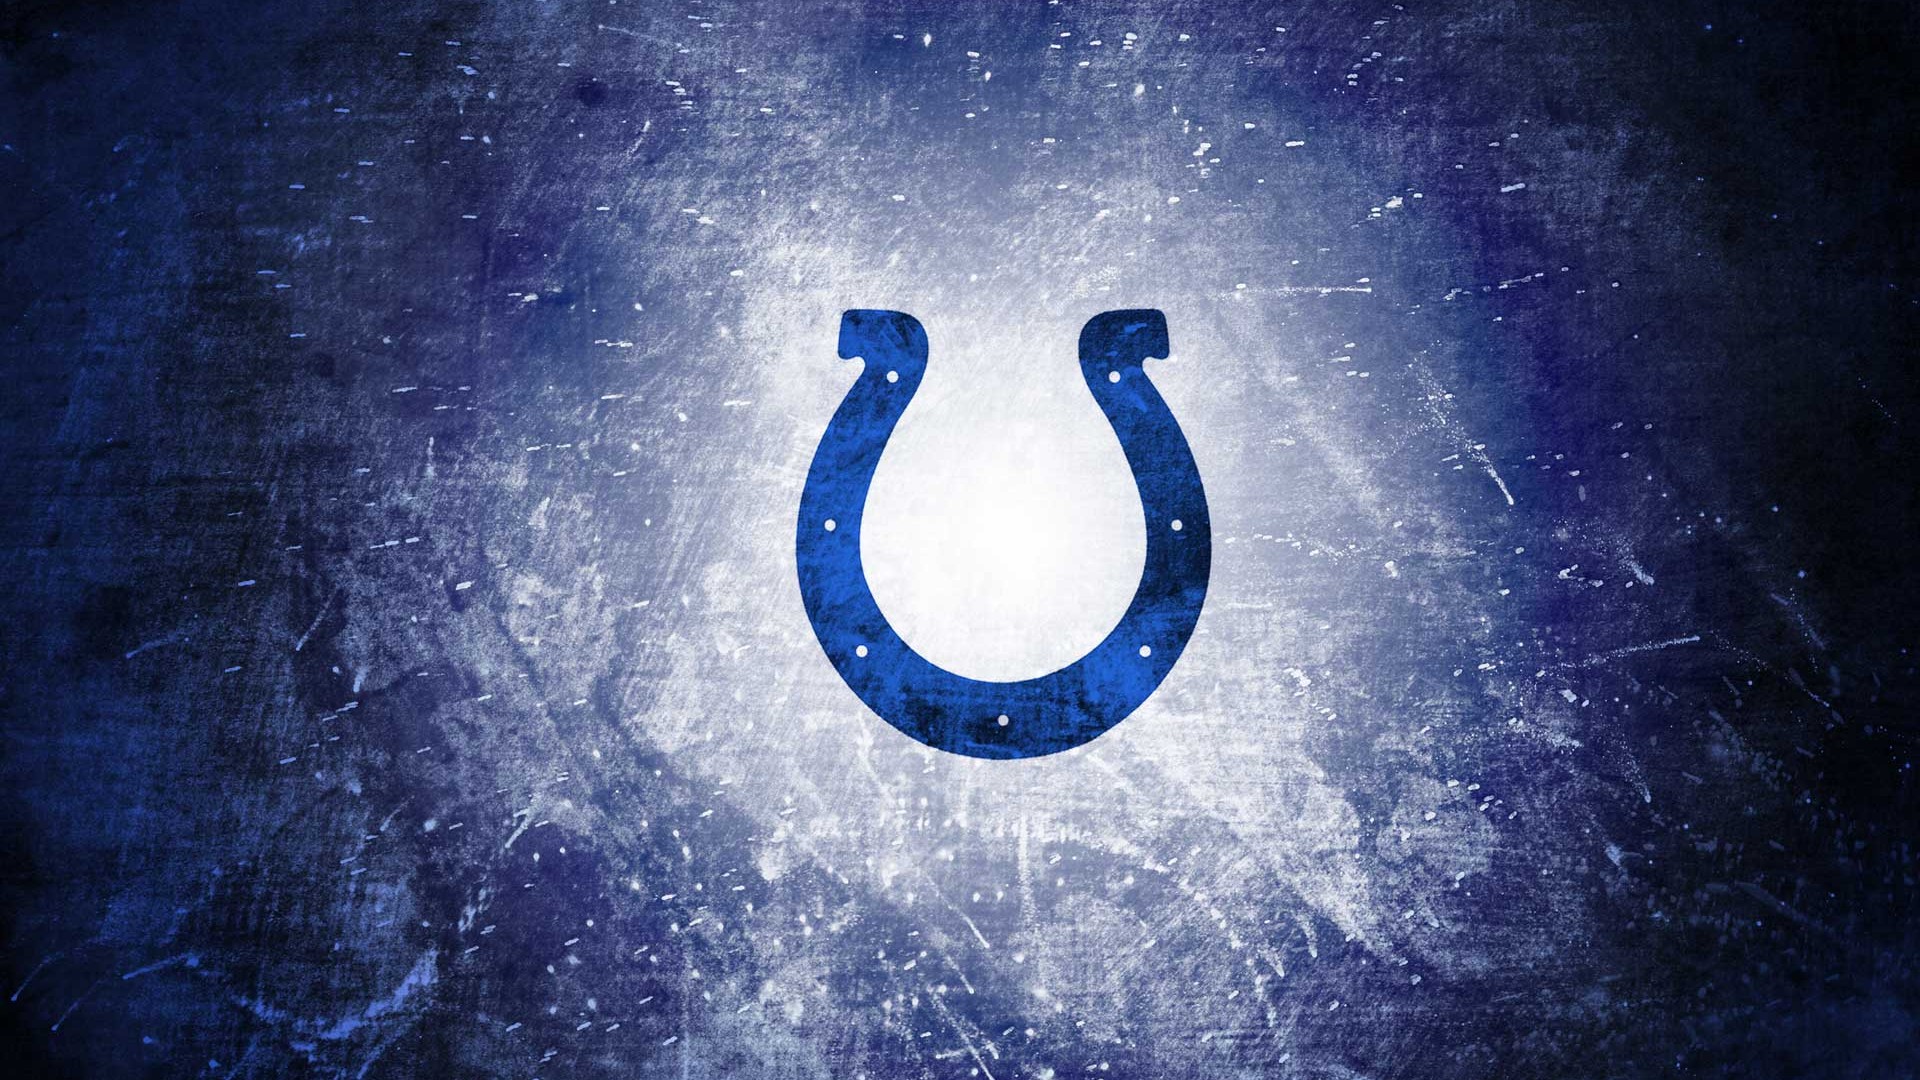 Indianapolis Colts Wallpaper For Mac Backgrounds 1920x1080